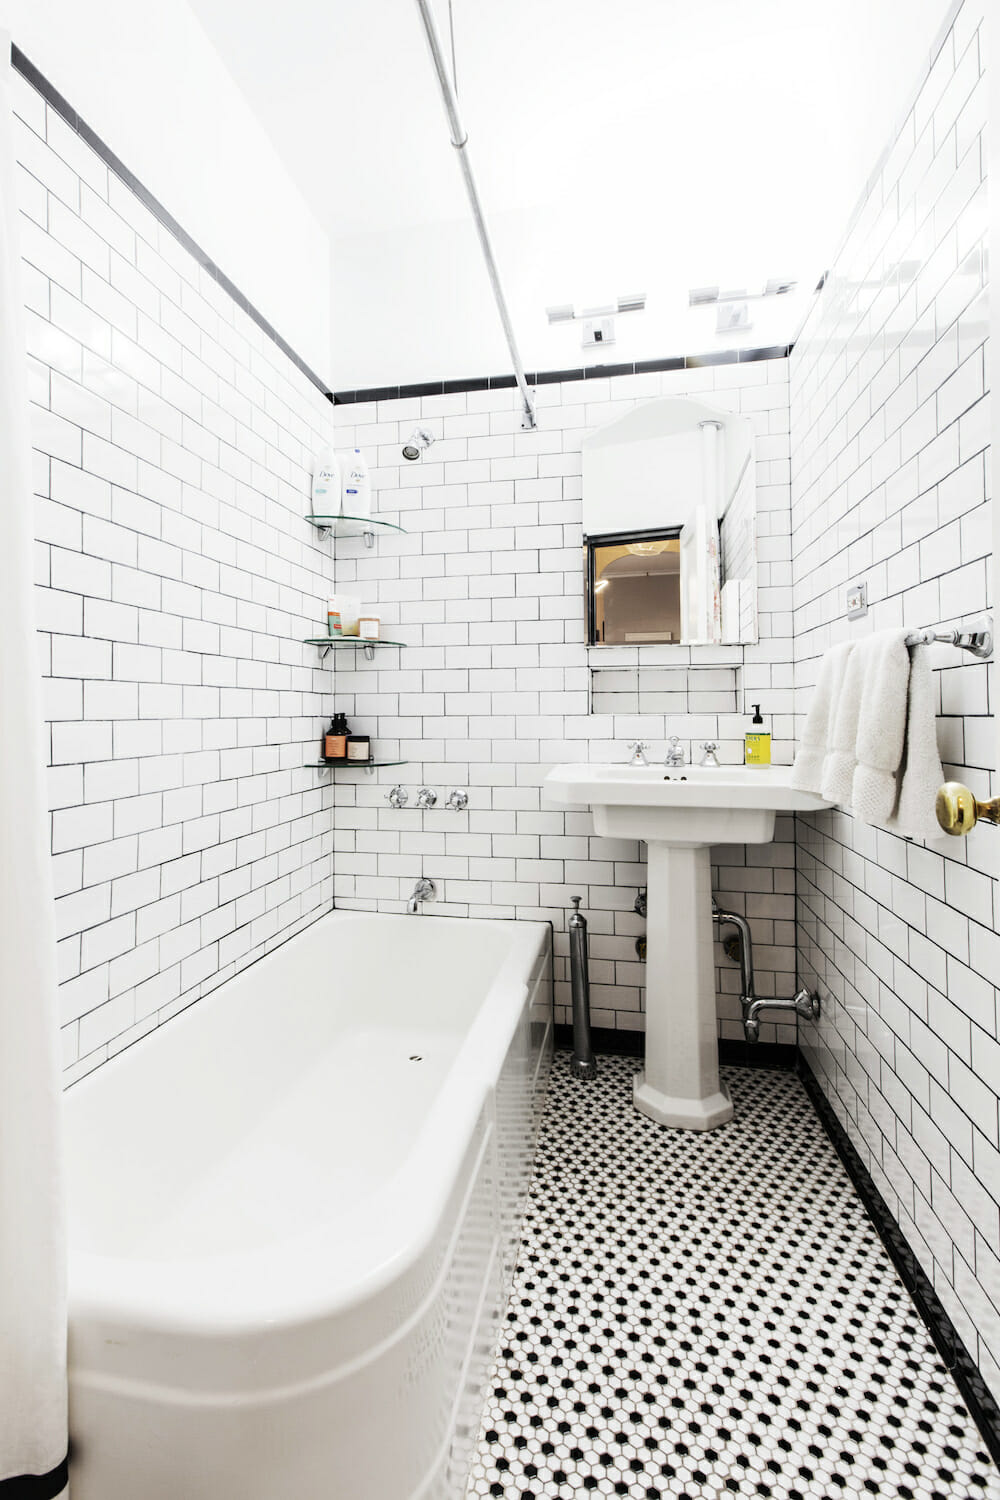 Image of renovated bathroom with fresh grout